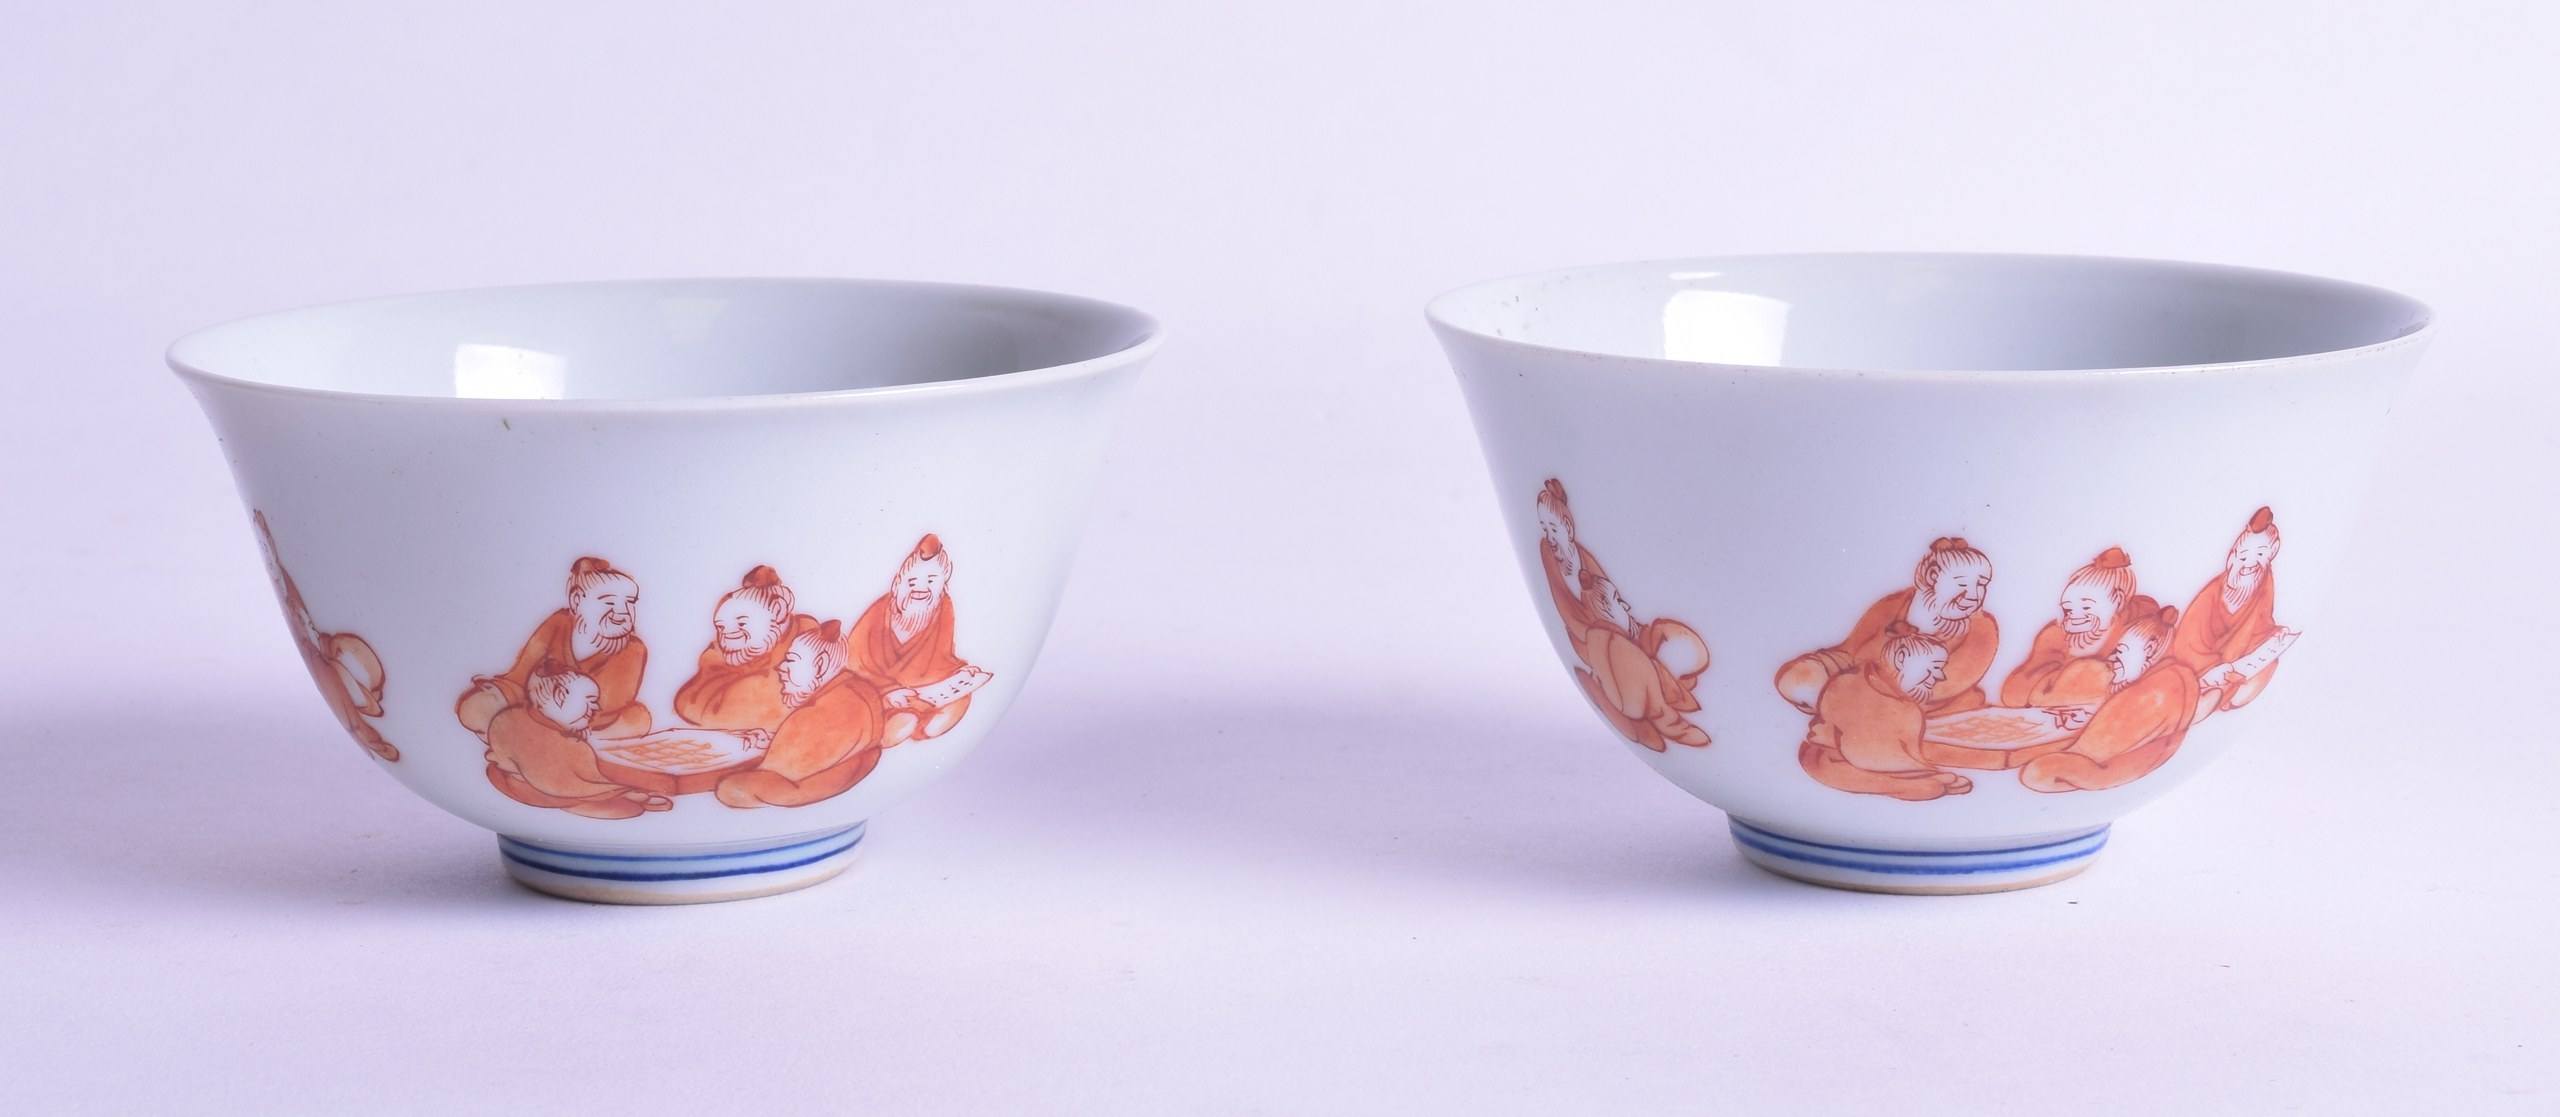 AN UNUSUAL PAIR OF EARLY 20TH CENTURY CHINESE IRON RED BOWLS painted with figures seated within